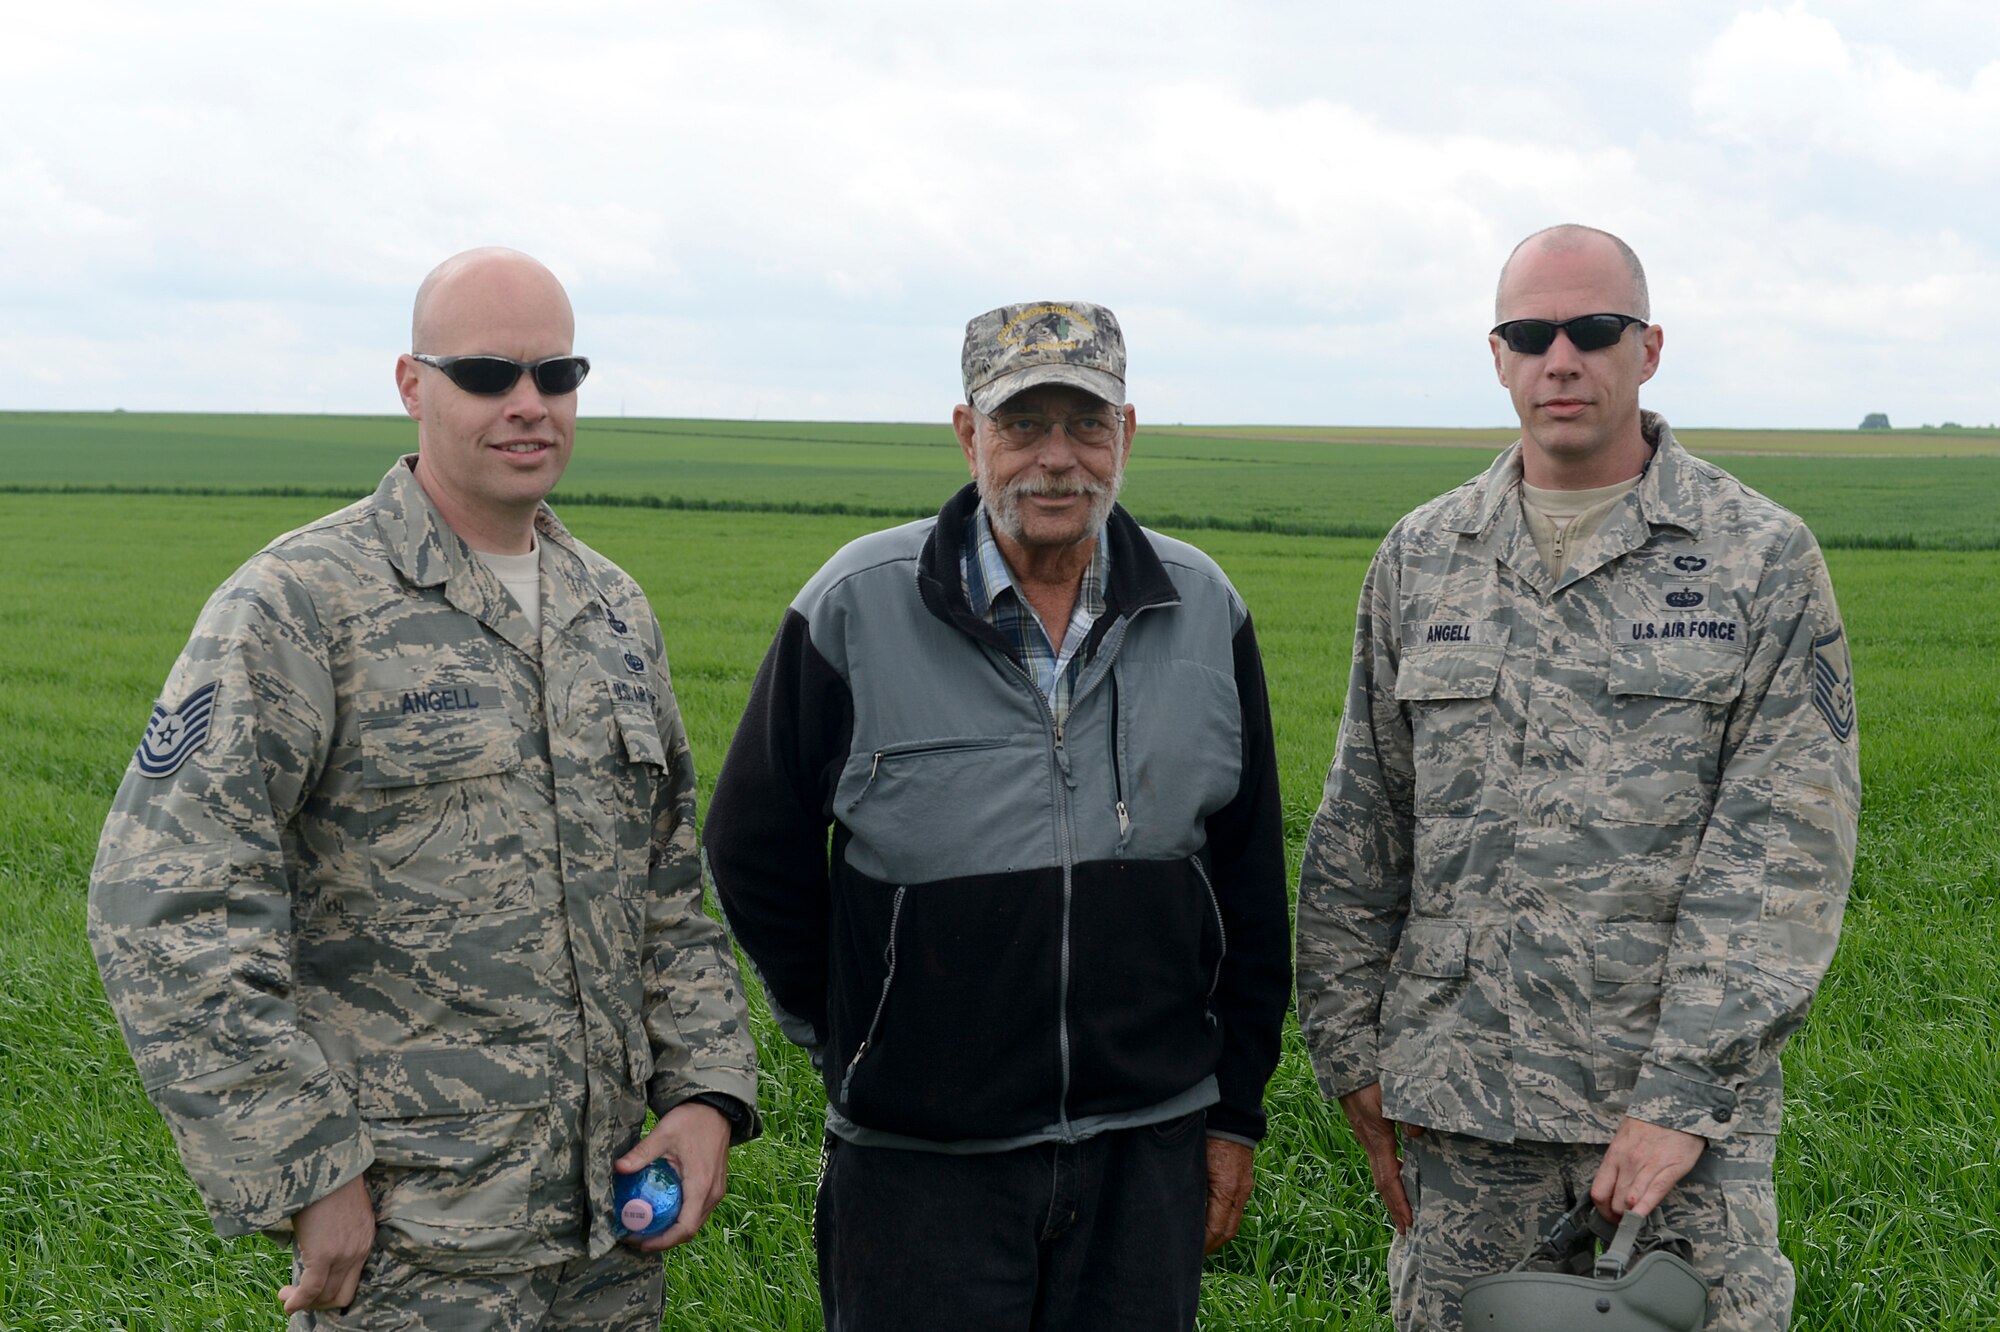 Tech. Sgt. Brian Angell, left, and Master Sgt. Kevin Angell, right, stand with their father, Sam Angell, center, May 8, 2014, during International Jump Week at Alzey landing zone, Germany. Sam Angell flew from Florida to Germany, to see his sons jump together for the first time in both of their careers. (U.S. Air Force photo/Airman 1st Class Michael Stuart)